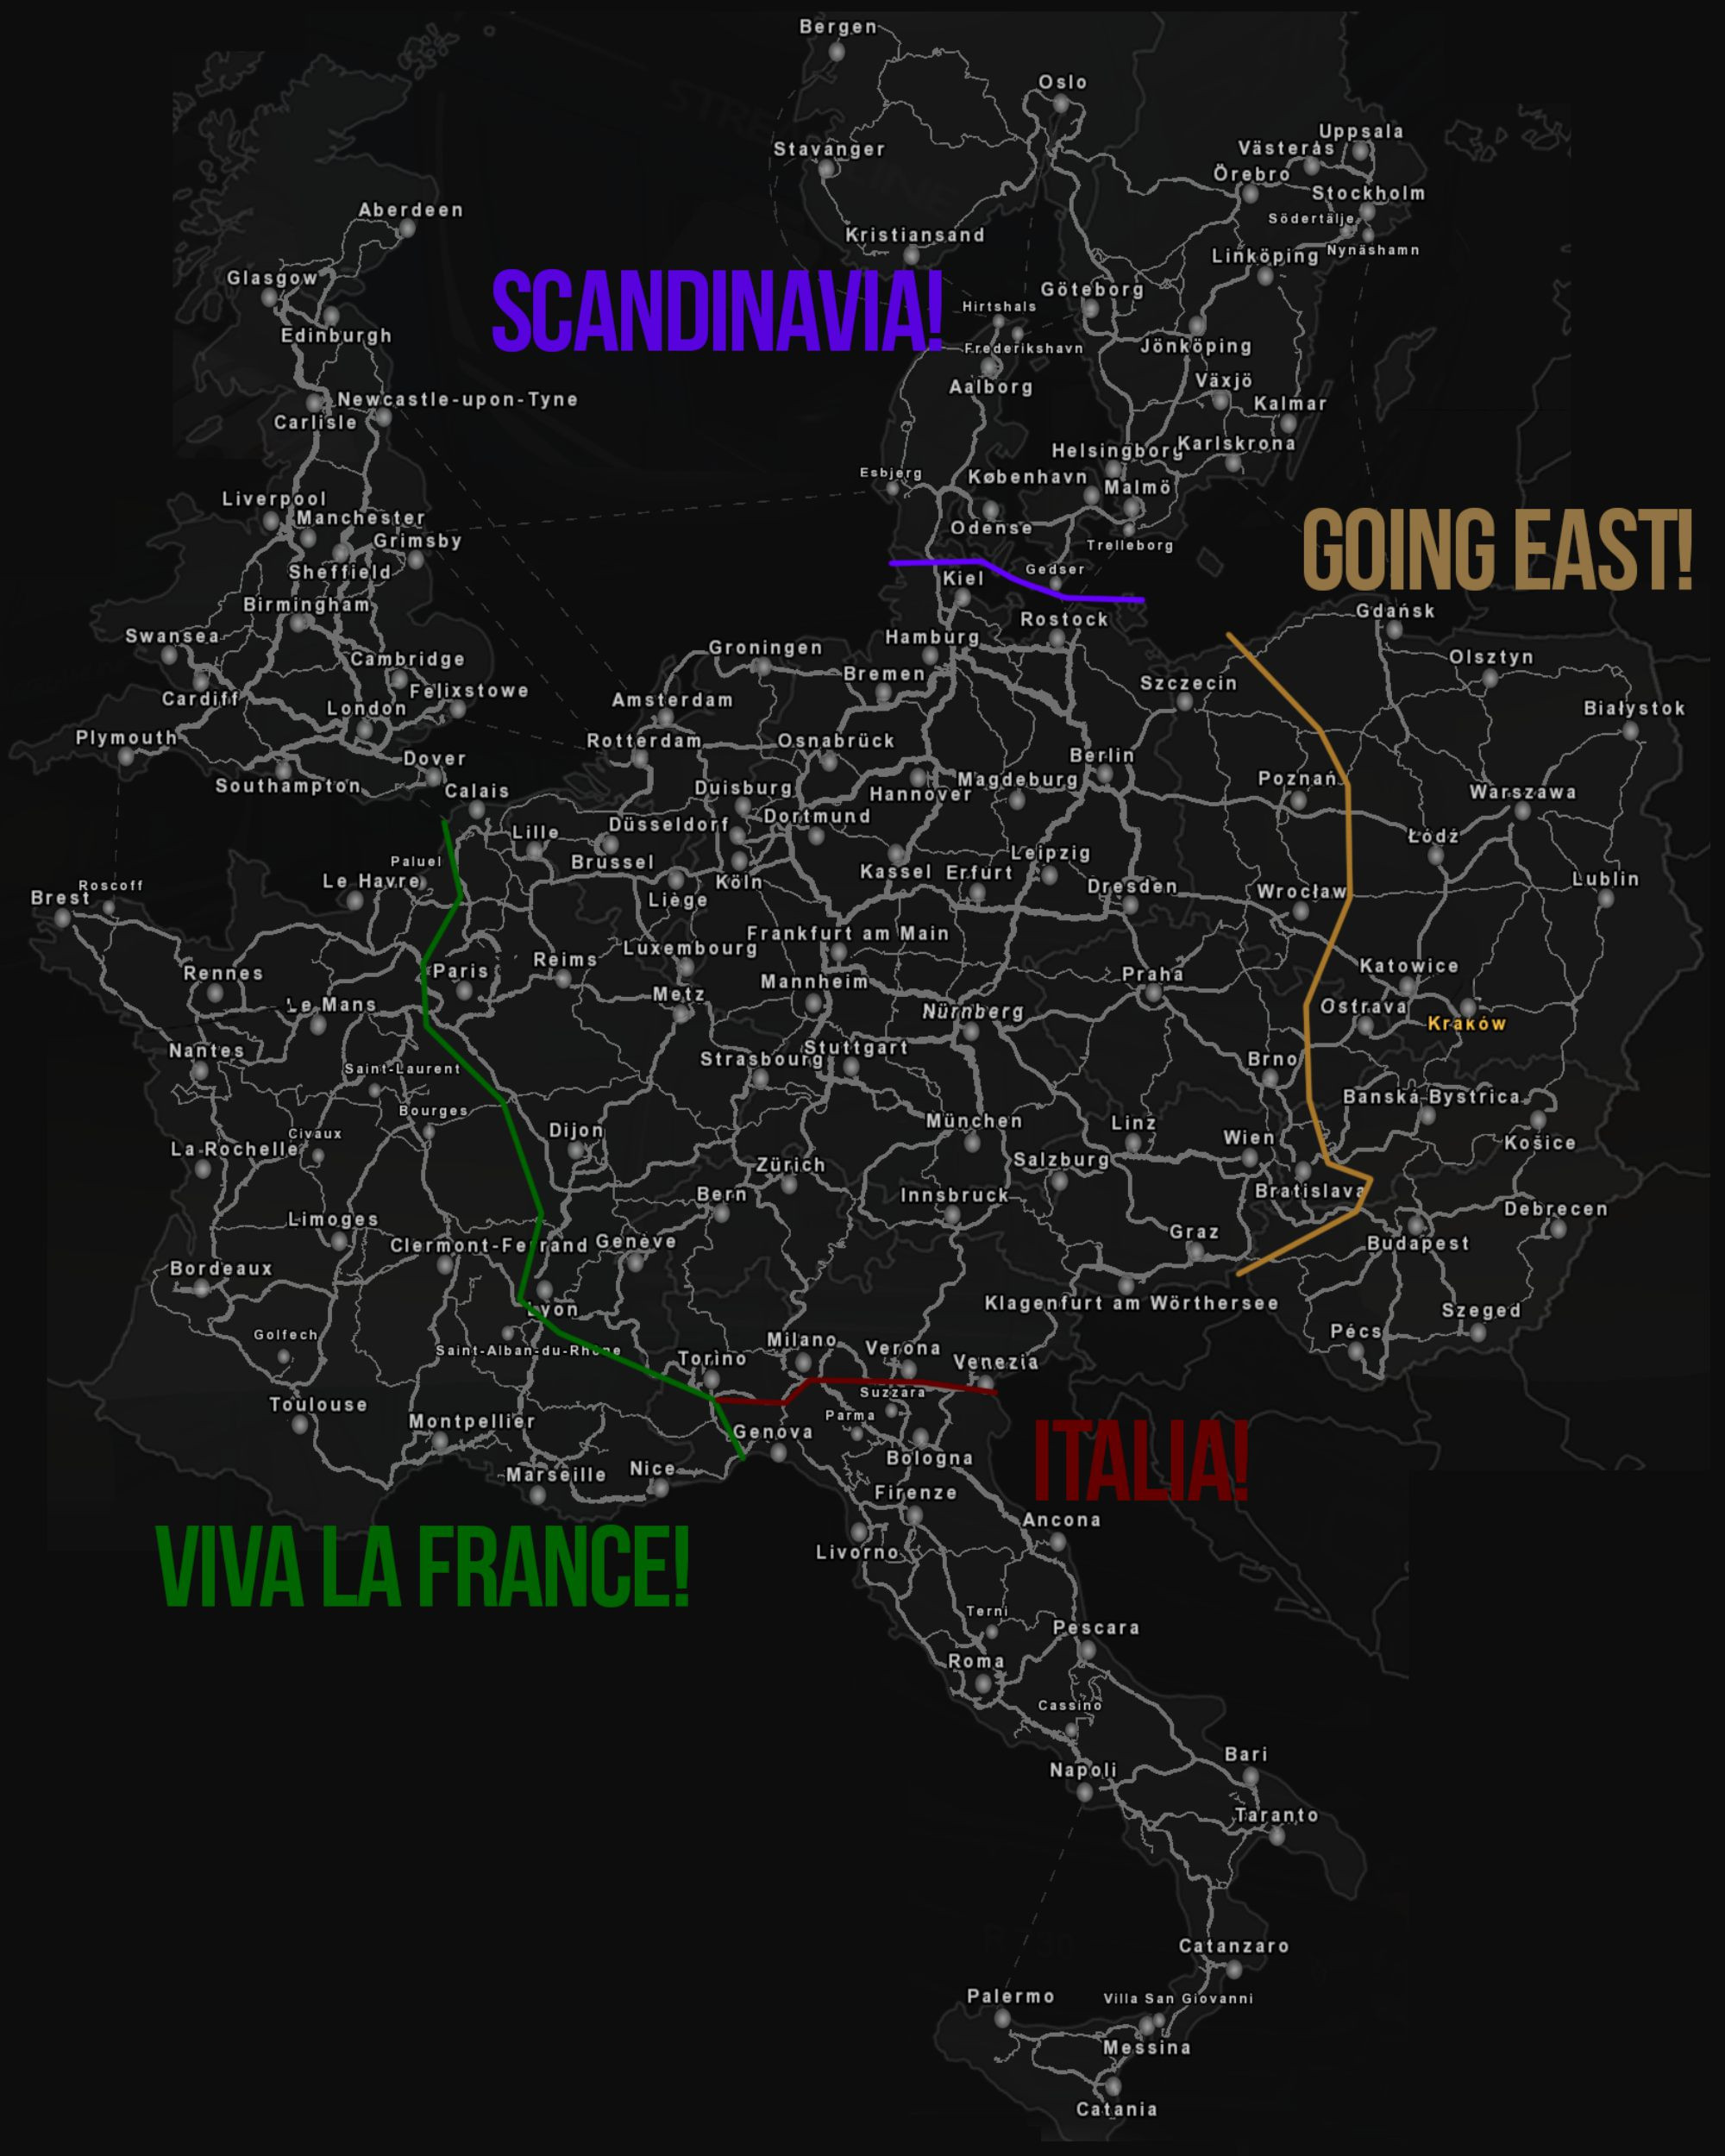 Ets 2 Printable Map Lovely World Of The Game